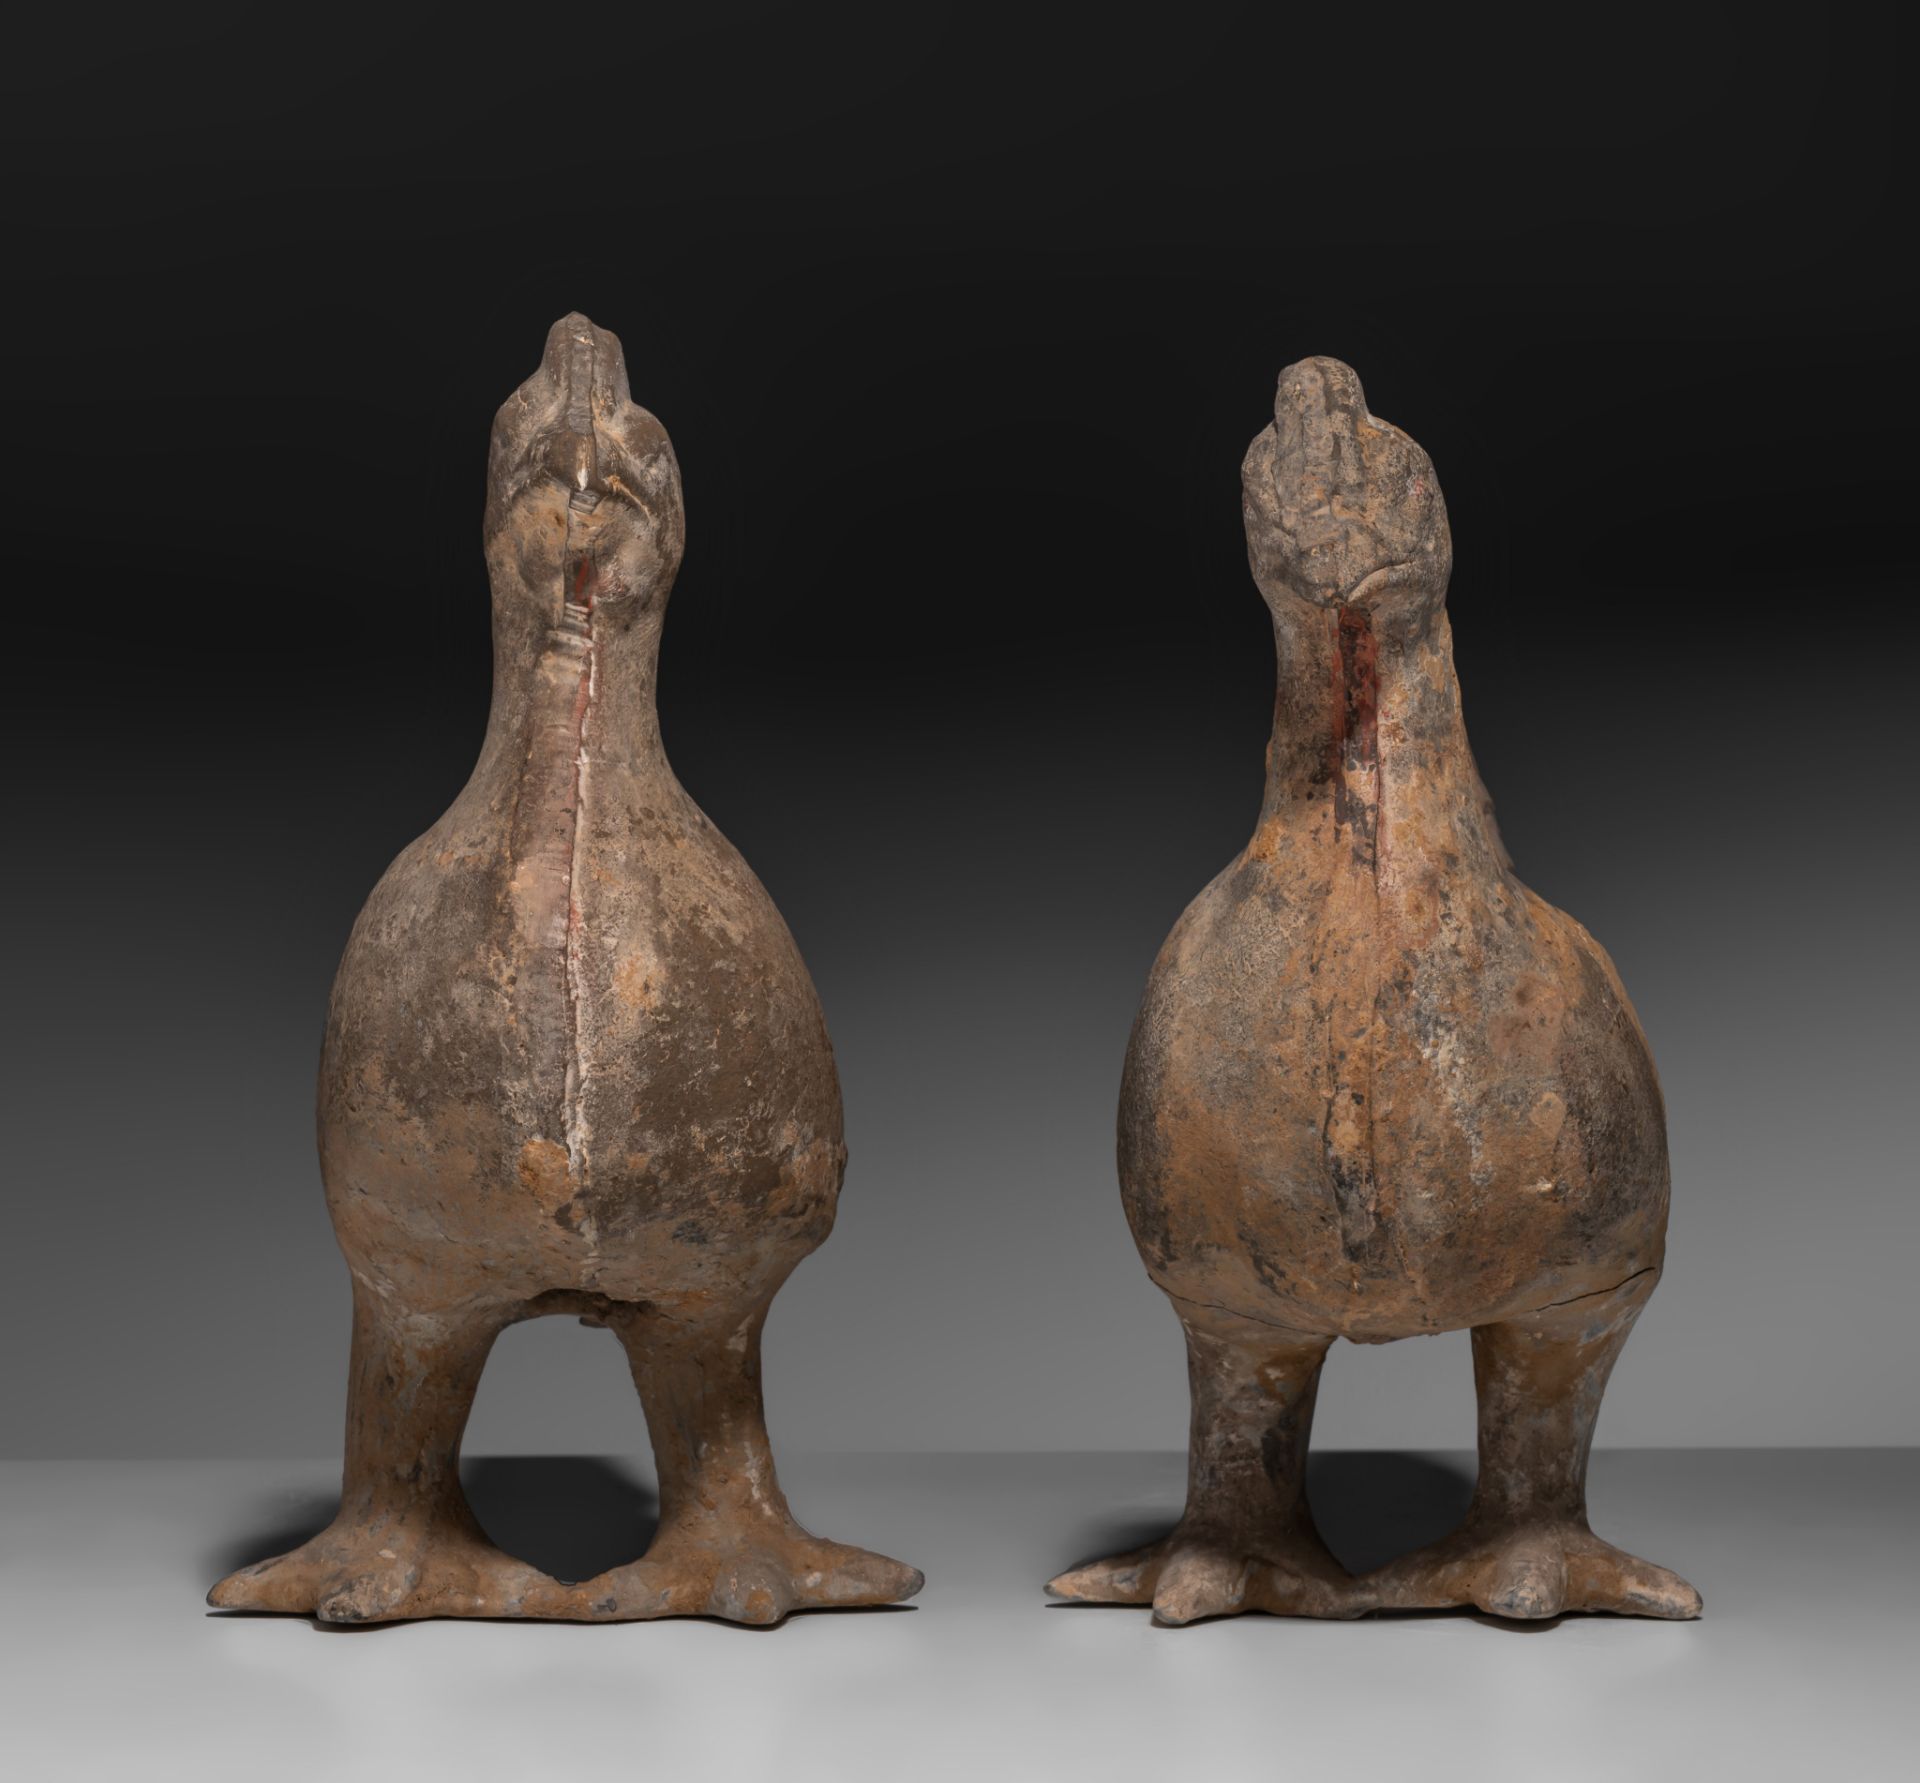 Two Chinese Han pottery figures of roosters, Han dynasty, H 21,8 - 22,8 cm - Image 4 of 8